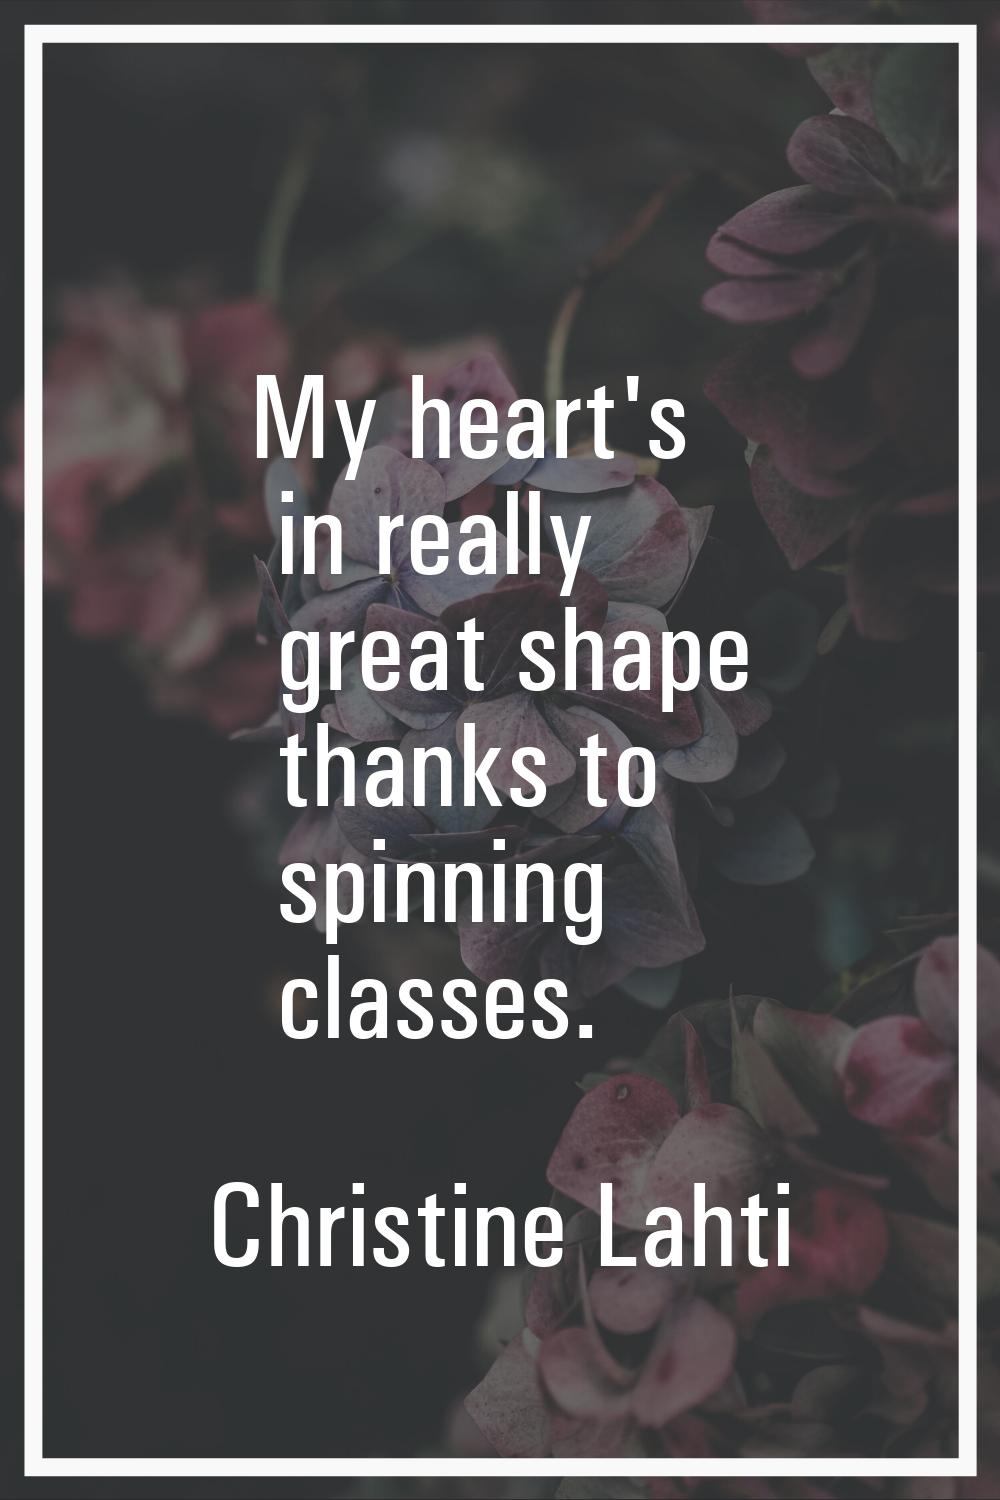 My heart's in really great shape thanks to spinning classes.